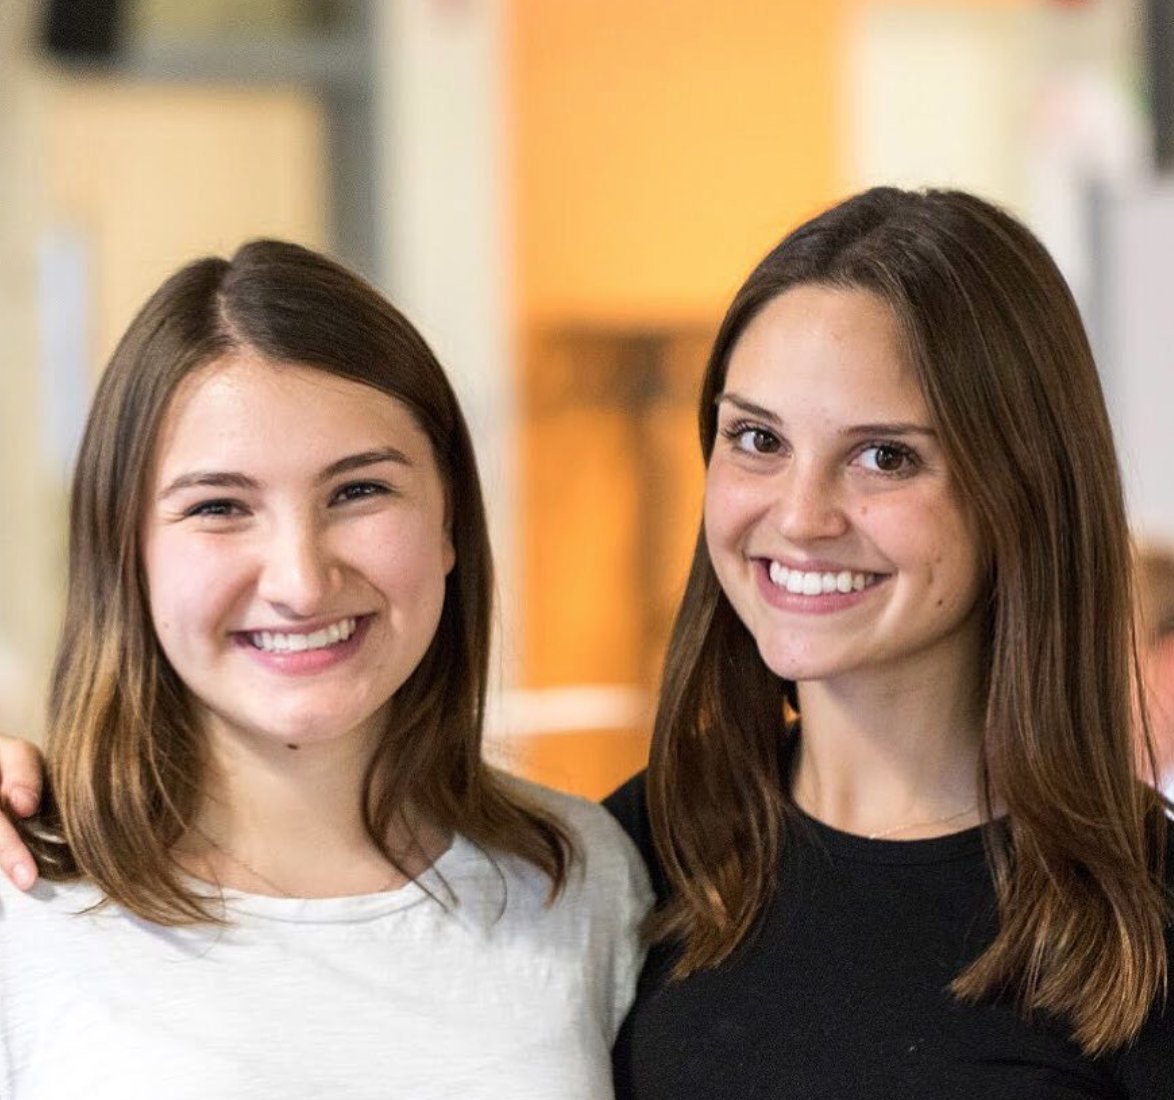 Happy International Women in Engineering Day! Meet two of our team members, Allie and Lisa, who are both studying #engineering at Cornell University! #computerscience #biologicalengineering